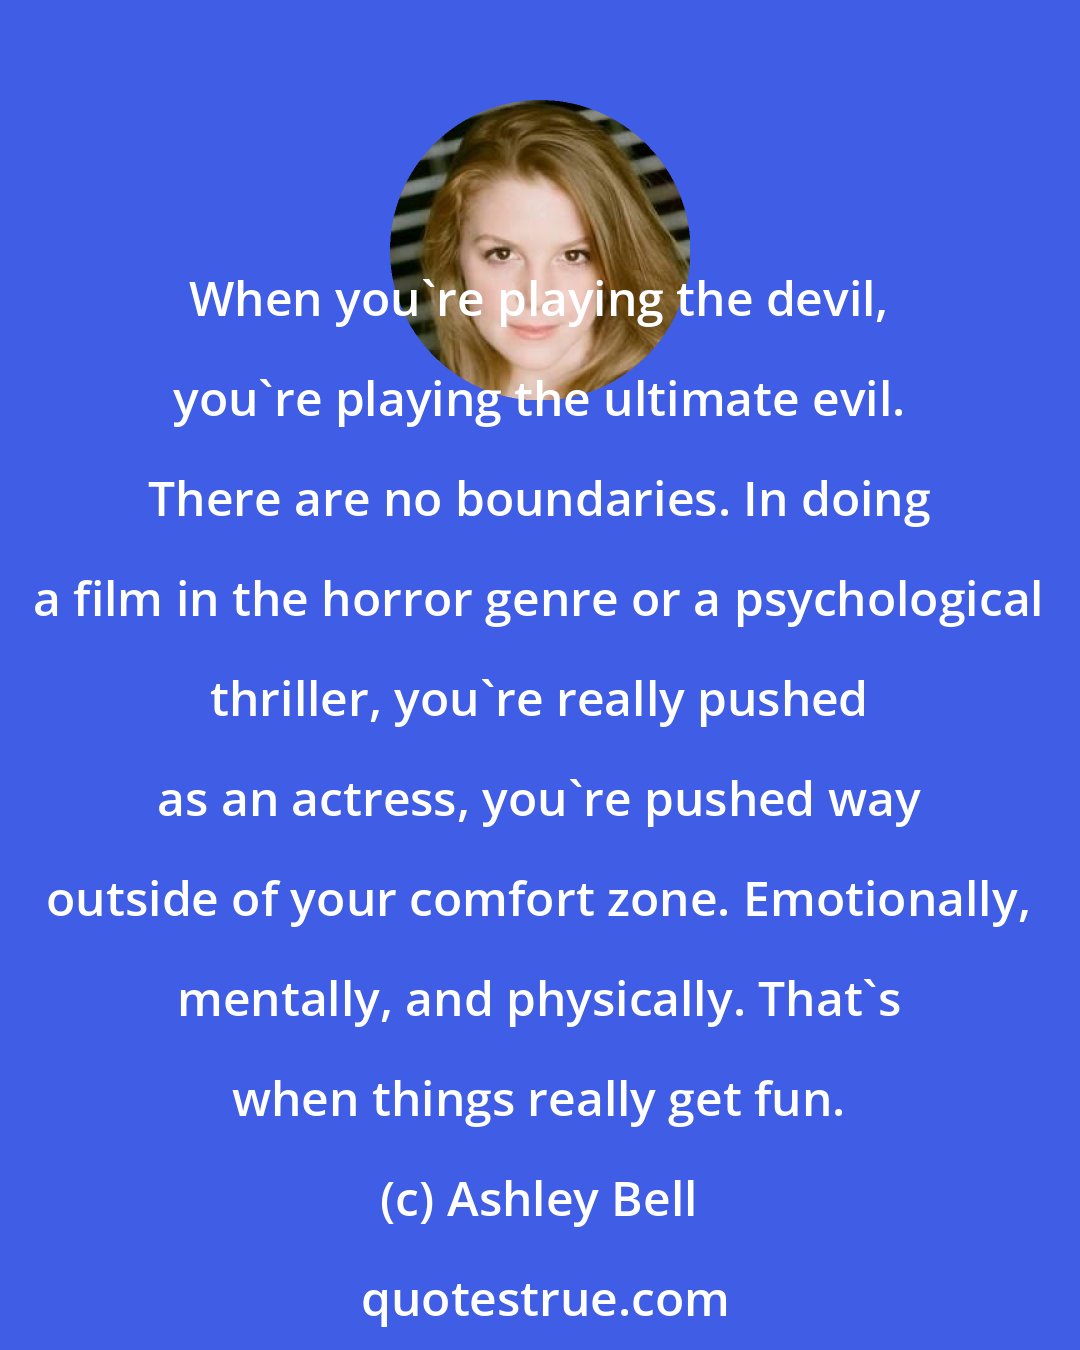 Ashley Bell: When you're playing the devil, you're playing the ultimate evil. There are no boundaries. In doing a film in the horror genre or a psychological thriller, you're really pushed as an actress, you're pushed way outside of your comfort zone. Emotionally, mentally, and physically. That's when things really get fun.